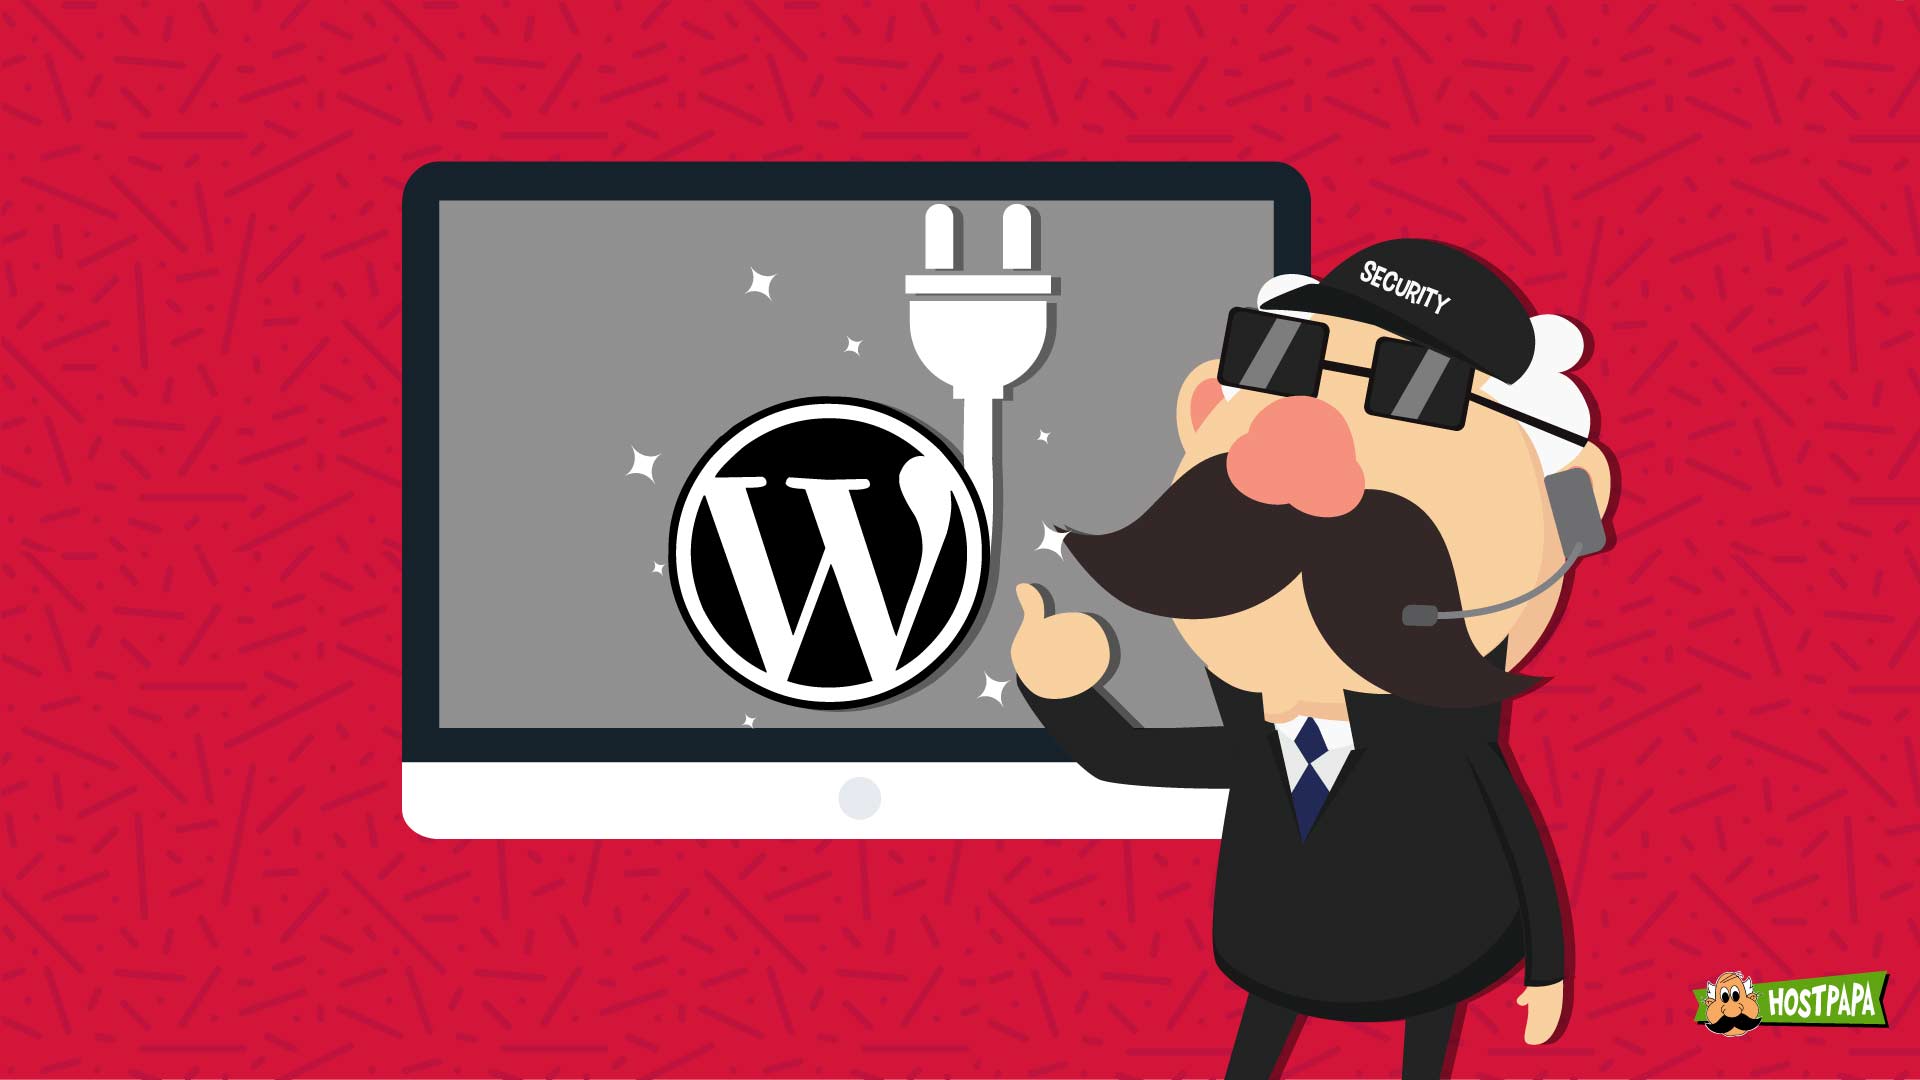 Check these plugins options to keep your WordPress secure